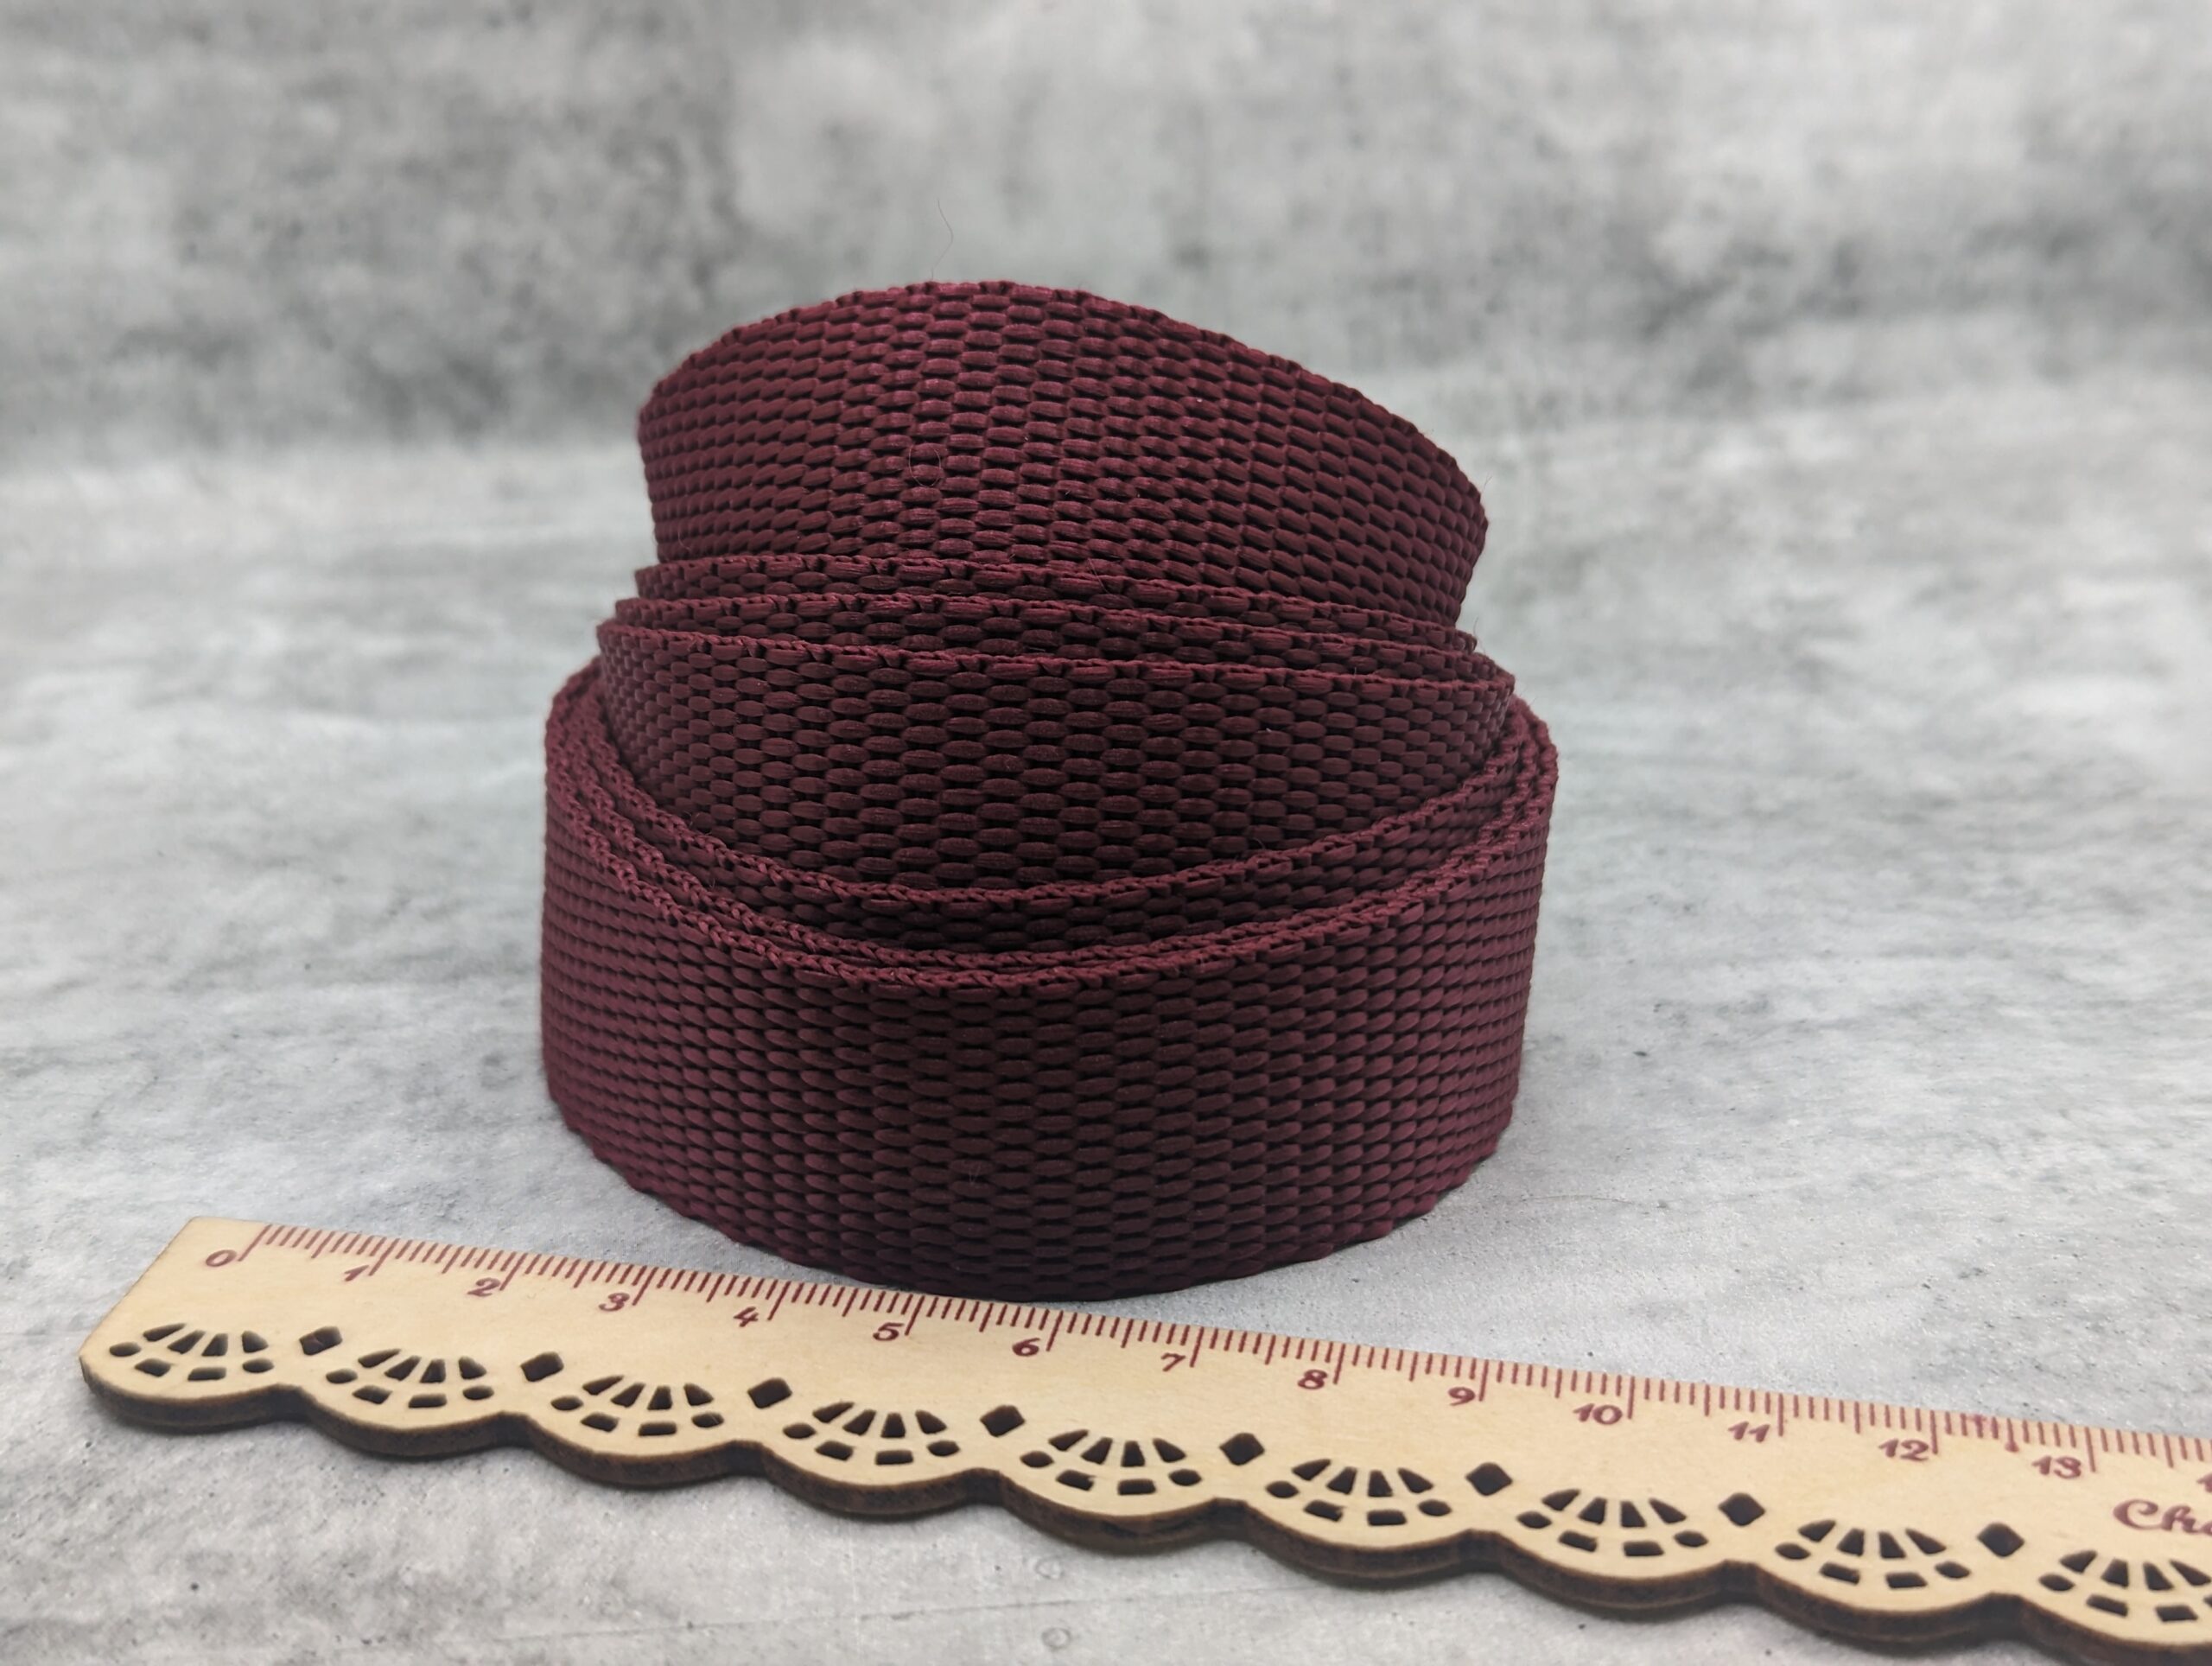 1 inch Polypropylene Strapping - Burgandy with Ruler - Electric Needle Girls